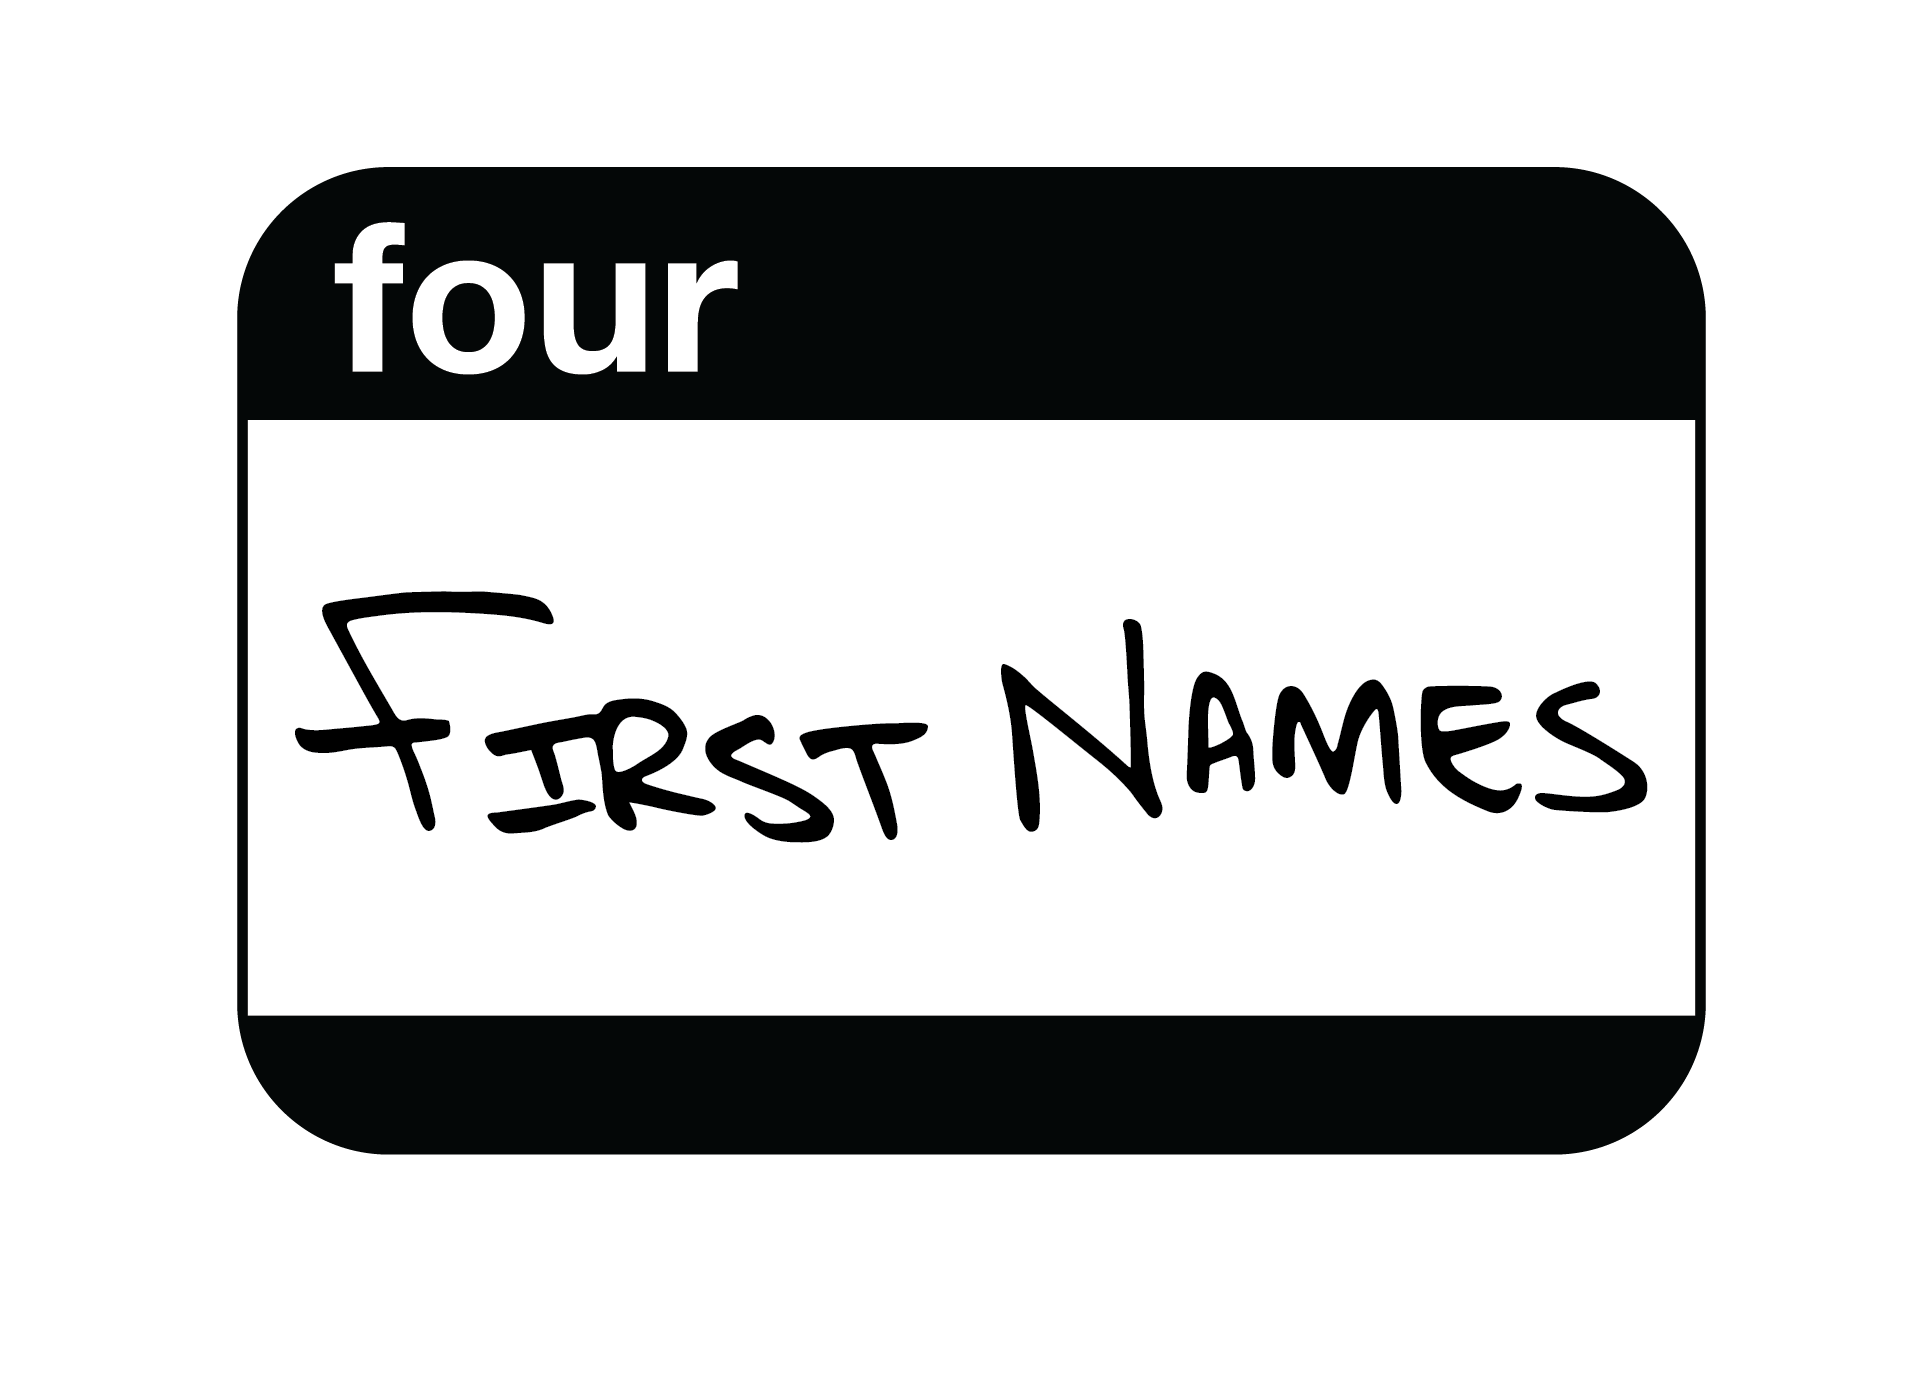 FOUR FIRST NAMES